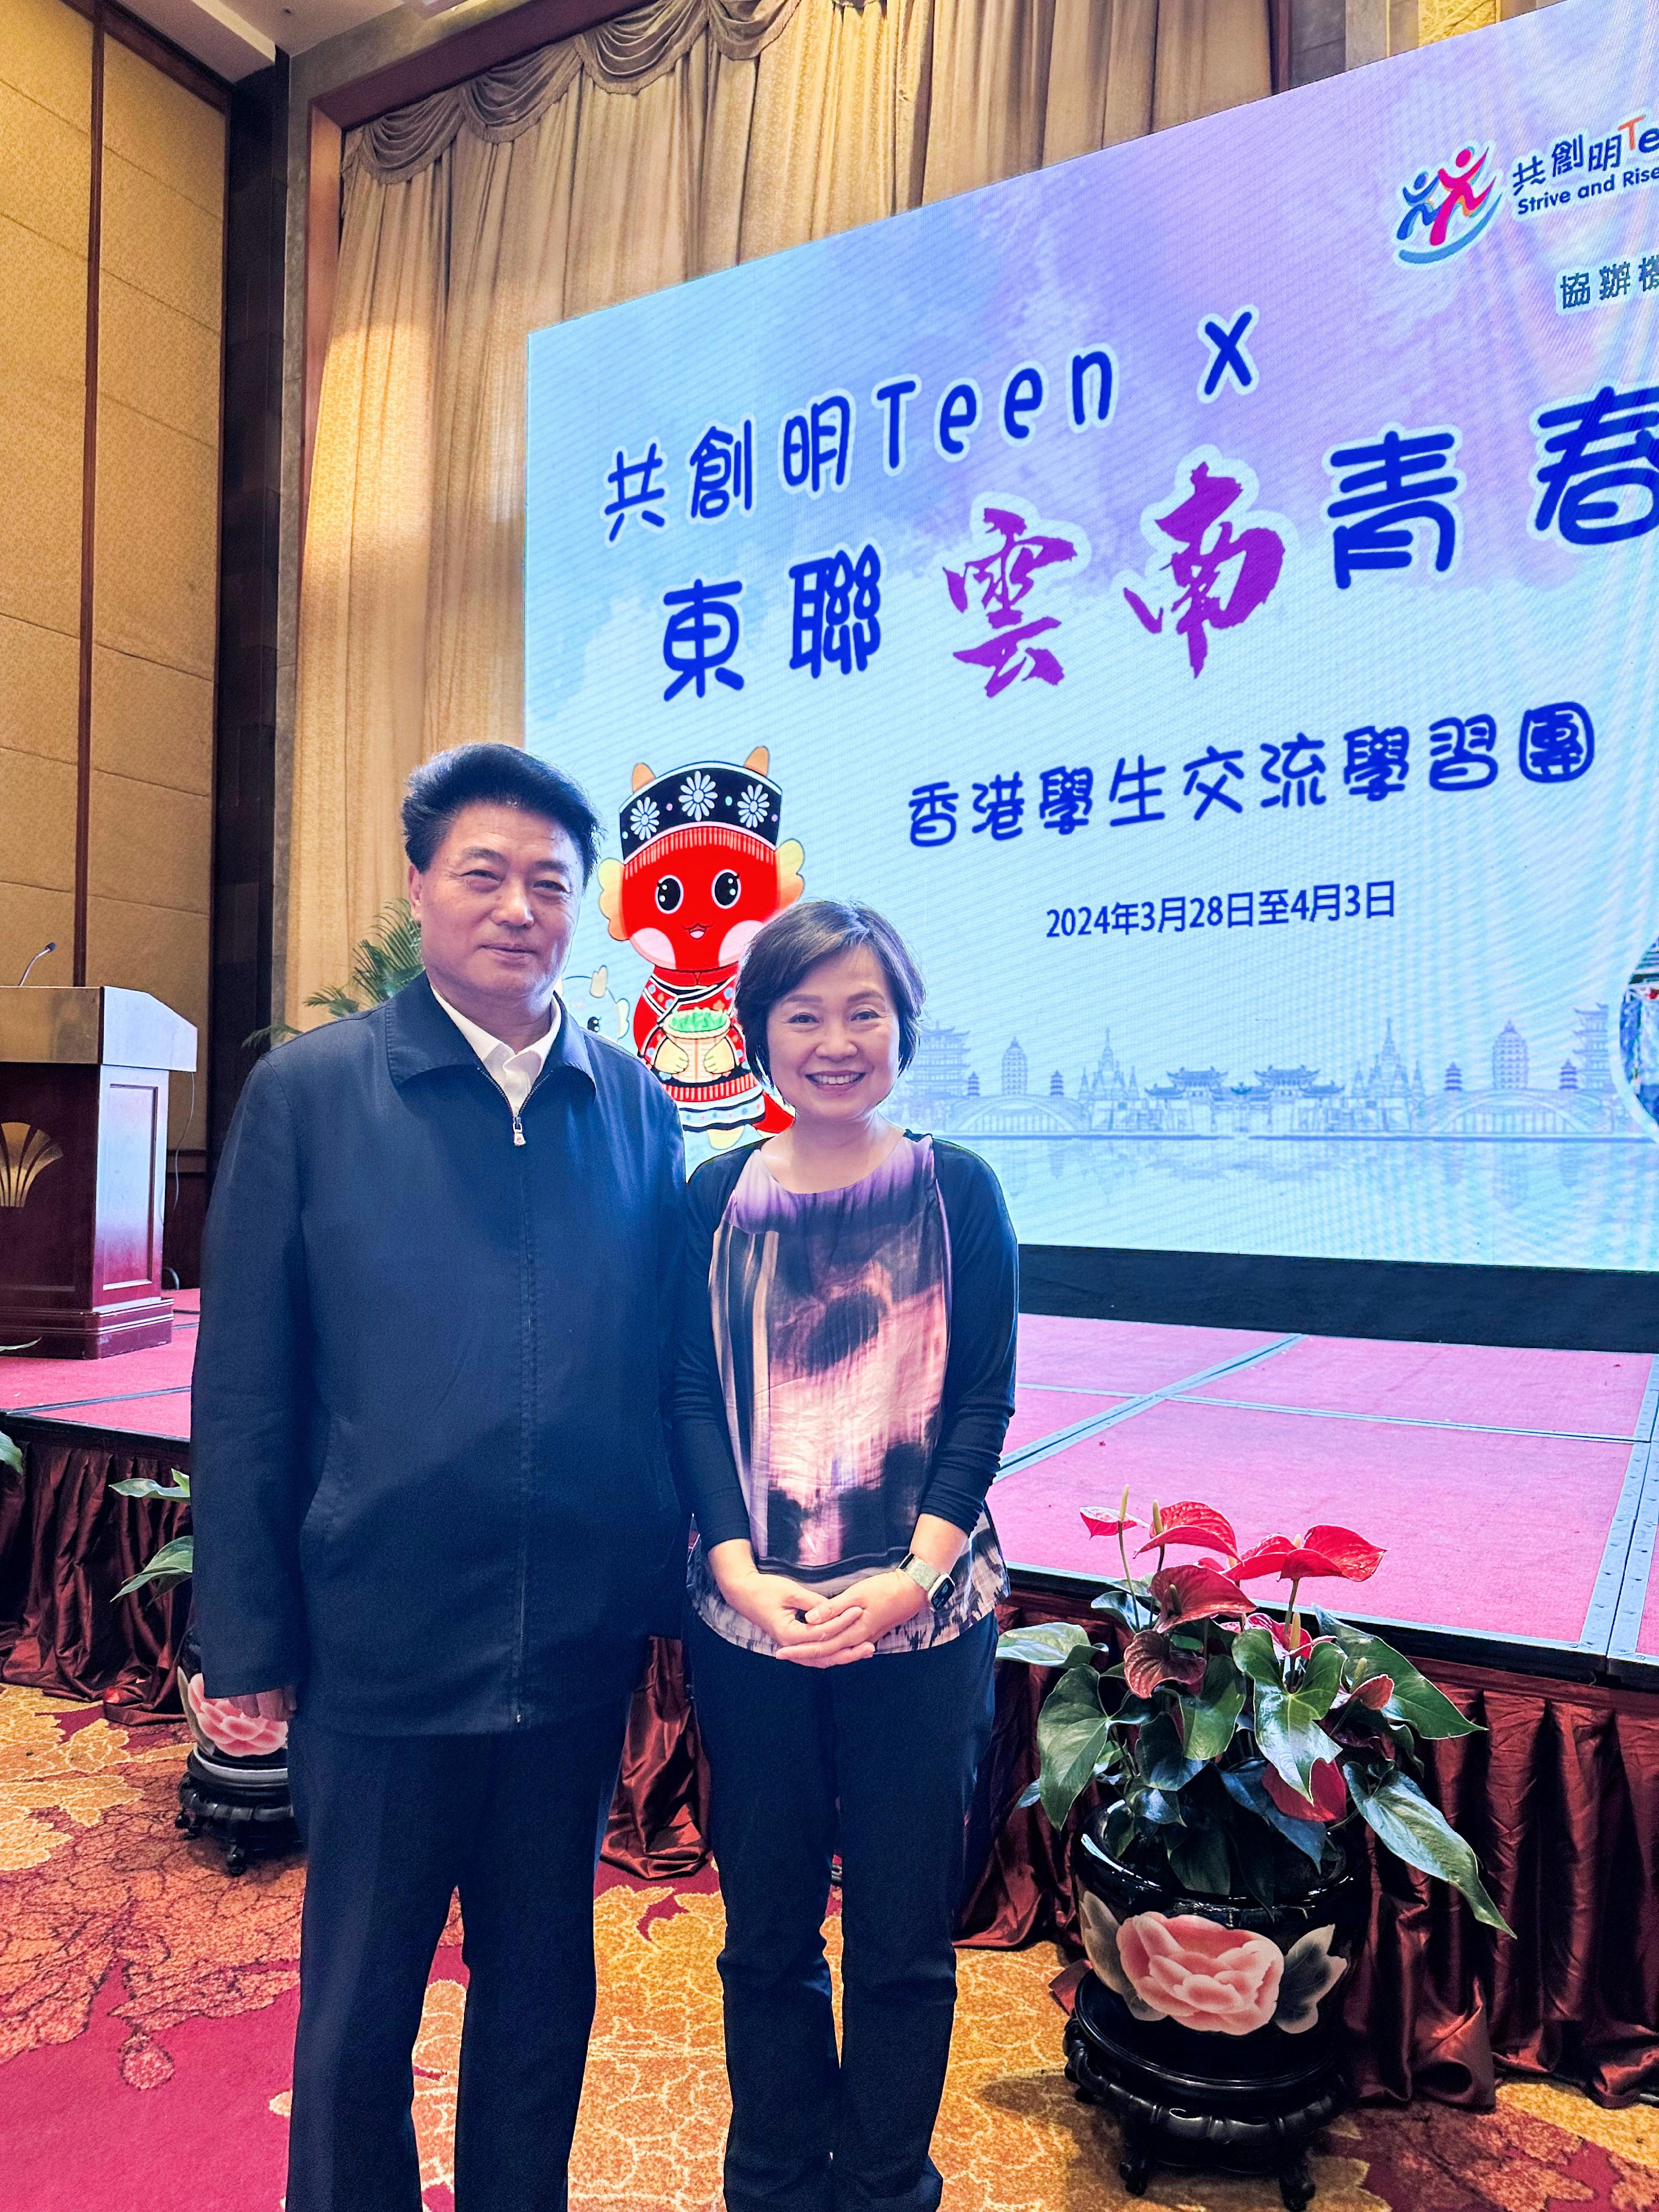 The Secretary for Education, Dr Choi Yuk-lin, today (April 2) attended the closing ceremony of the Yunnan Exchange Tour under the Strive and Rise Programme in Kunming, Yunnan. Photo shows Dr Choi (right) and Vice Chairman of the Yunnan Provincial Committee of the Chinese People's Political Consultative Conference Mr He Lianghui (left) .